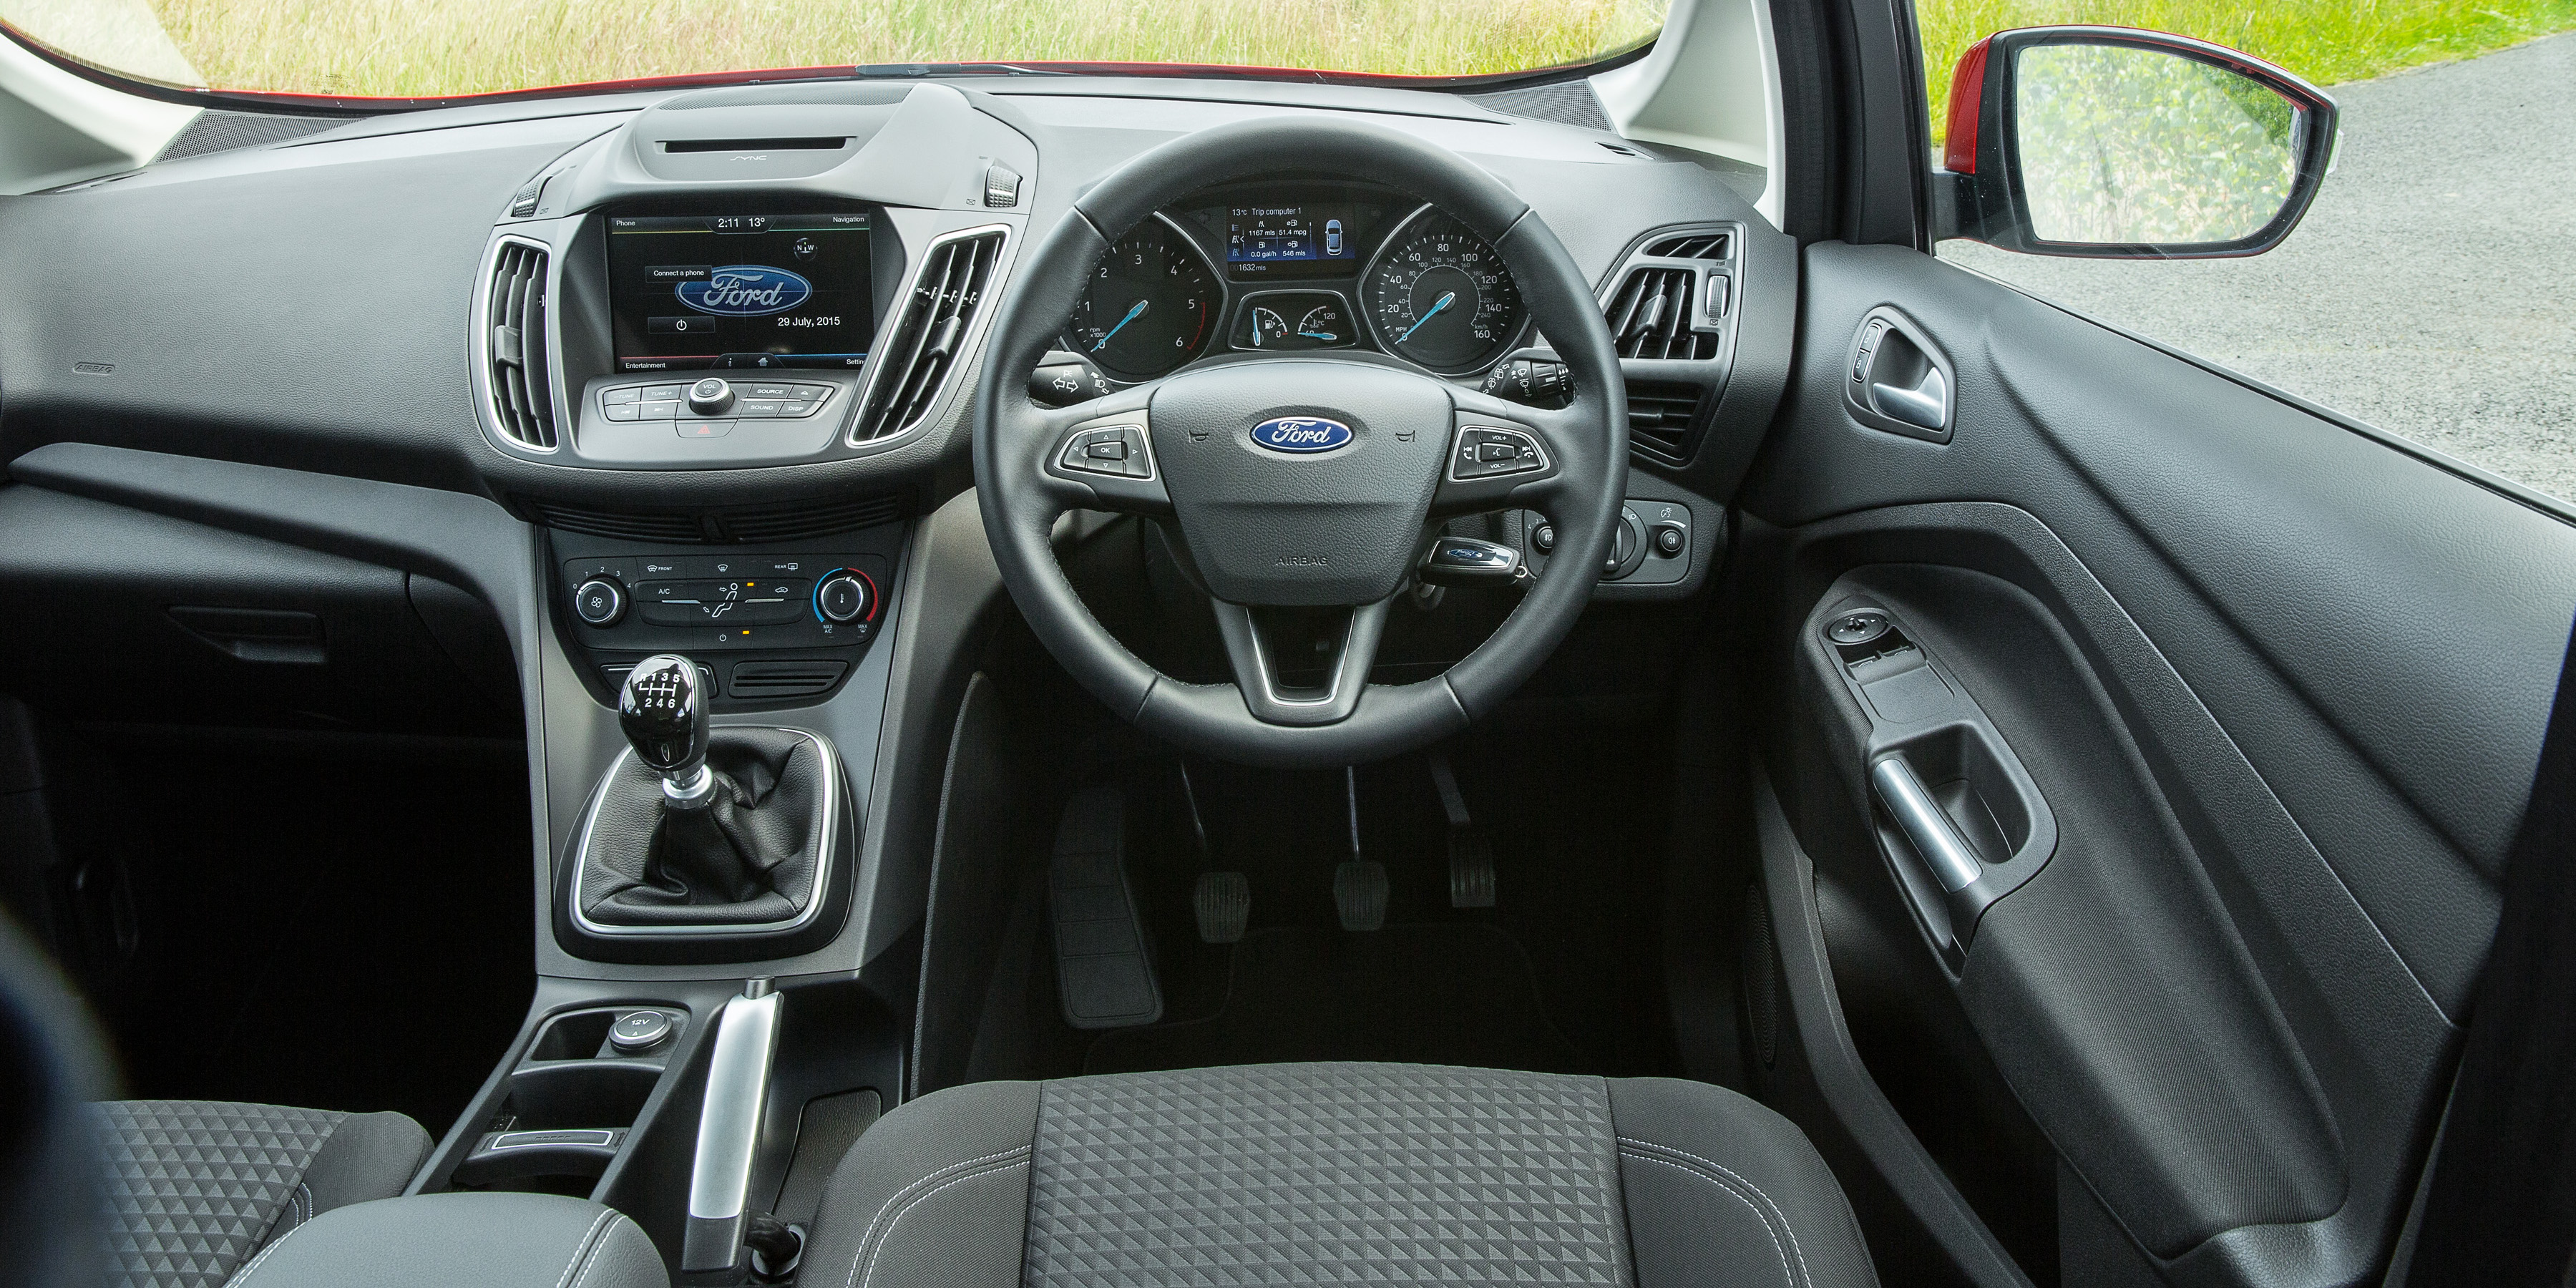 Ford C Max Interior Infotainment Carwow